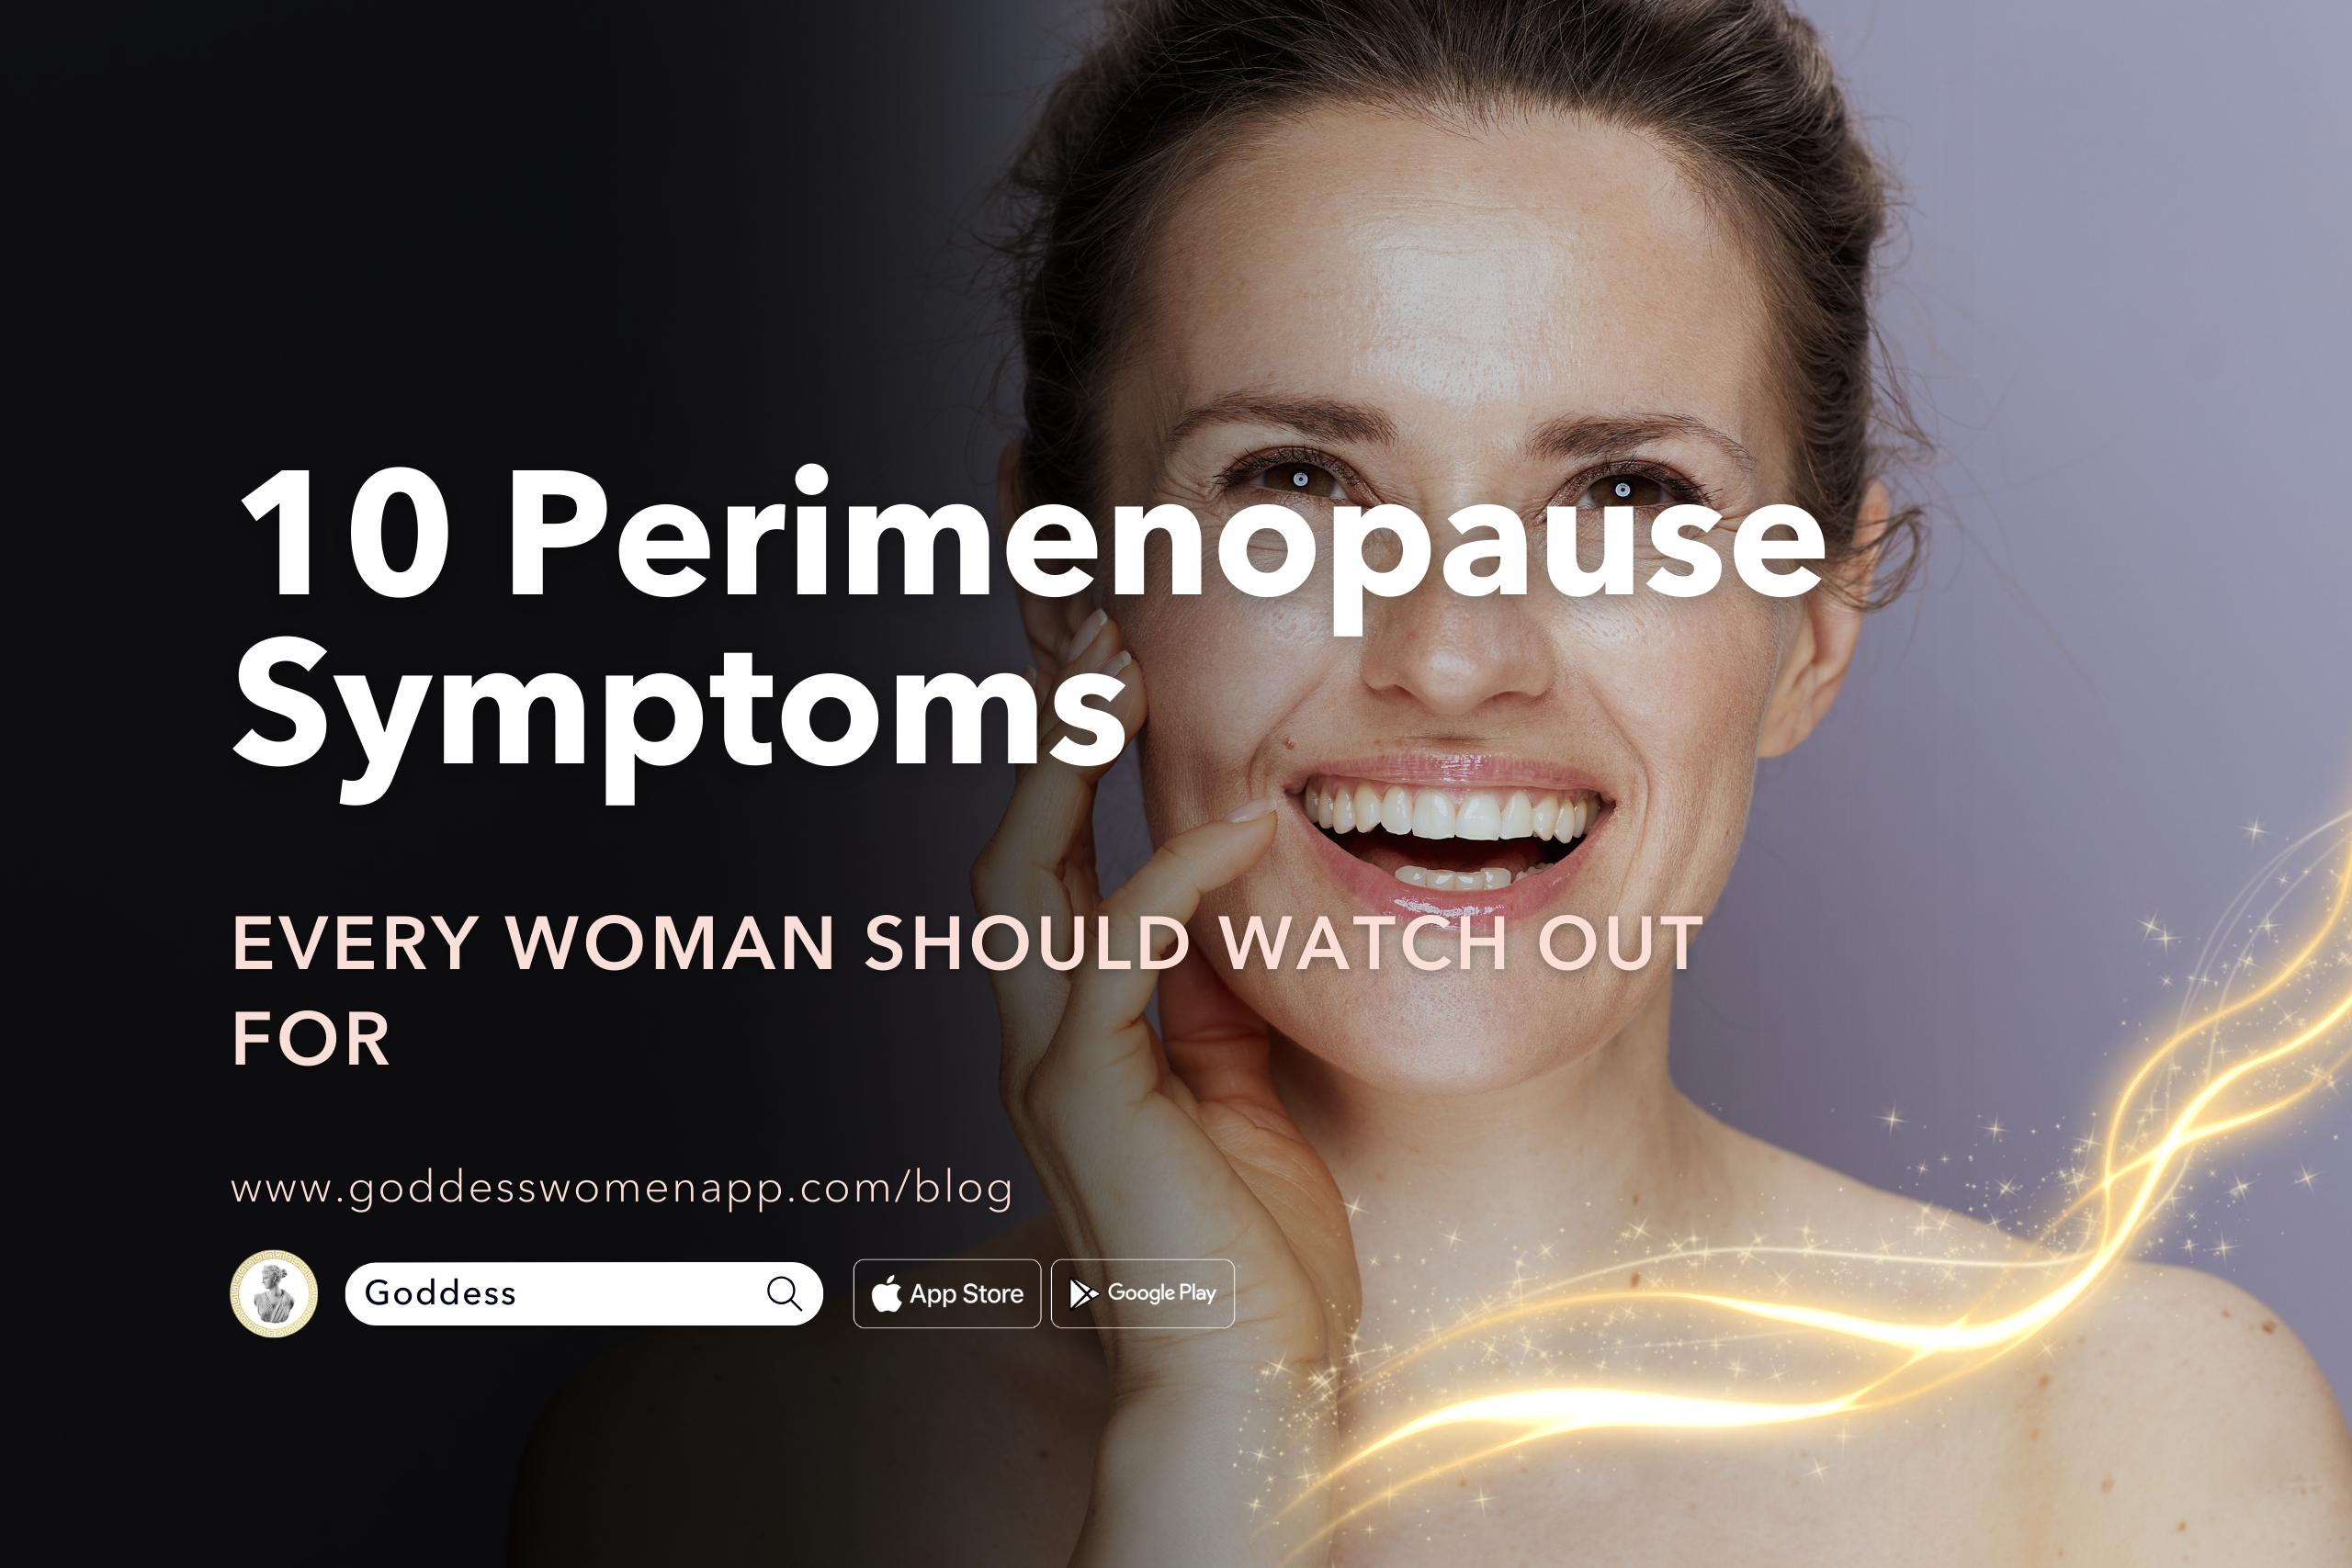 10 Perimenopause Symptoms Every Woman Should Watch Out For